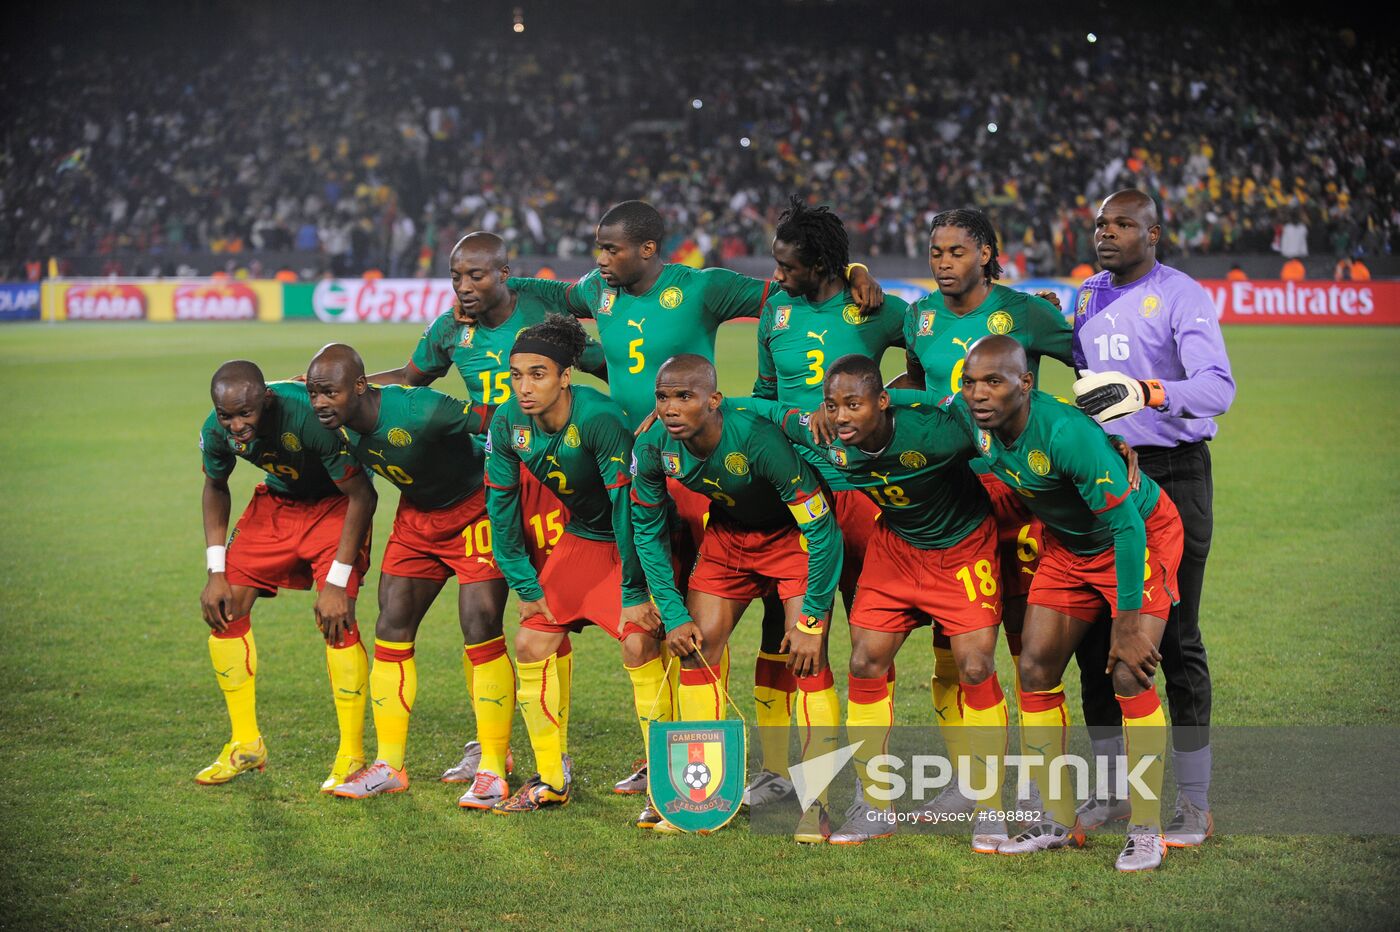 Cameroon's national soccer team